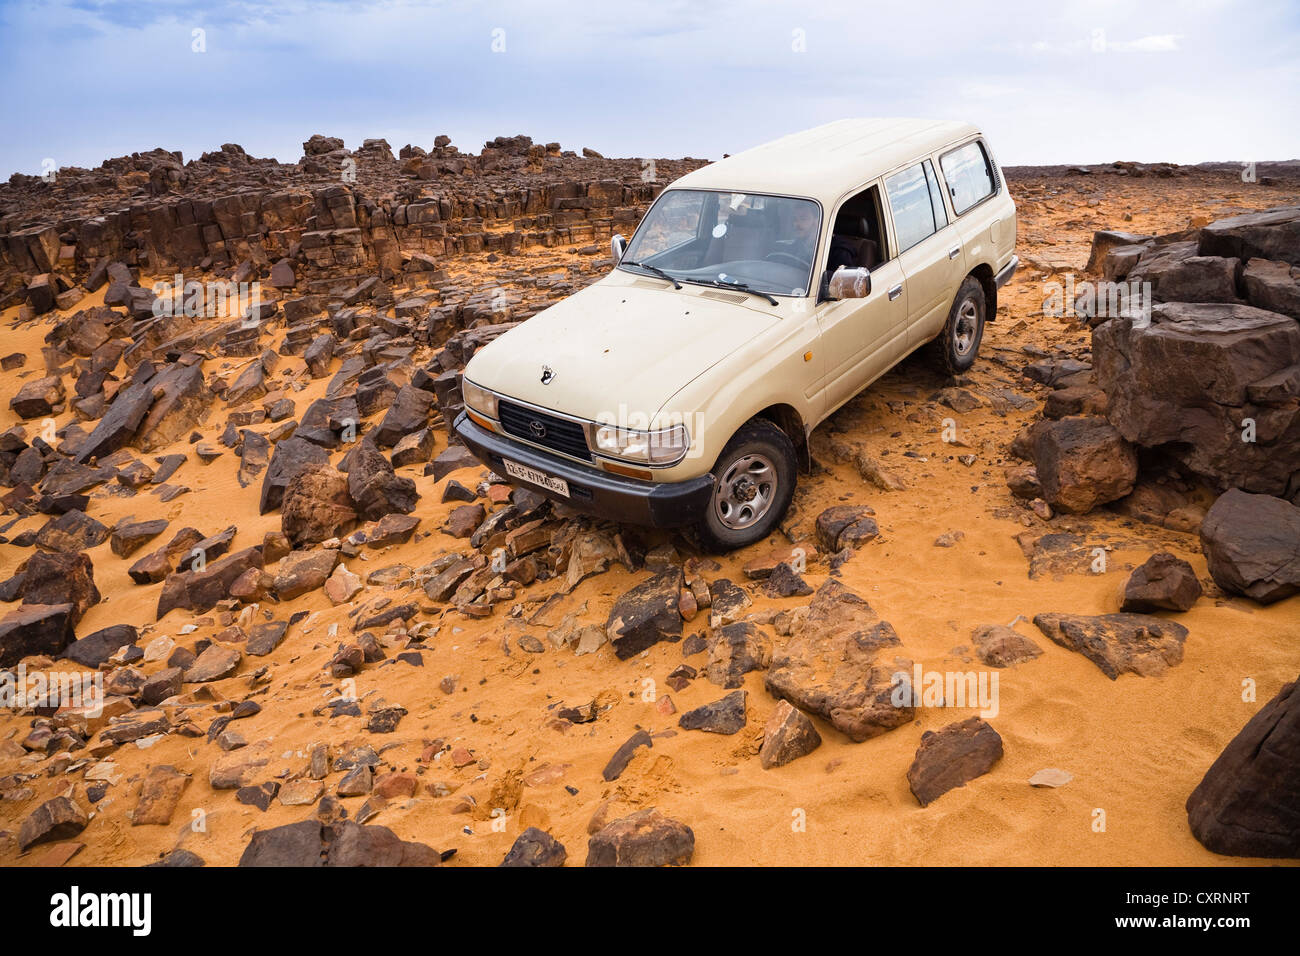 Jeep in the Libyan desert, Stony Desert, Acacus Mountains or Tadrart Acacus, Libya, North Africa, Africa Stock Photo